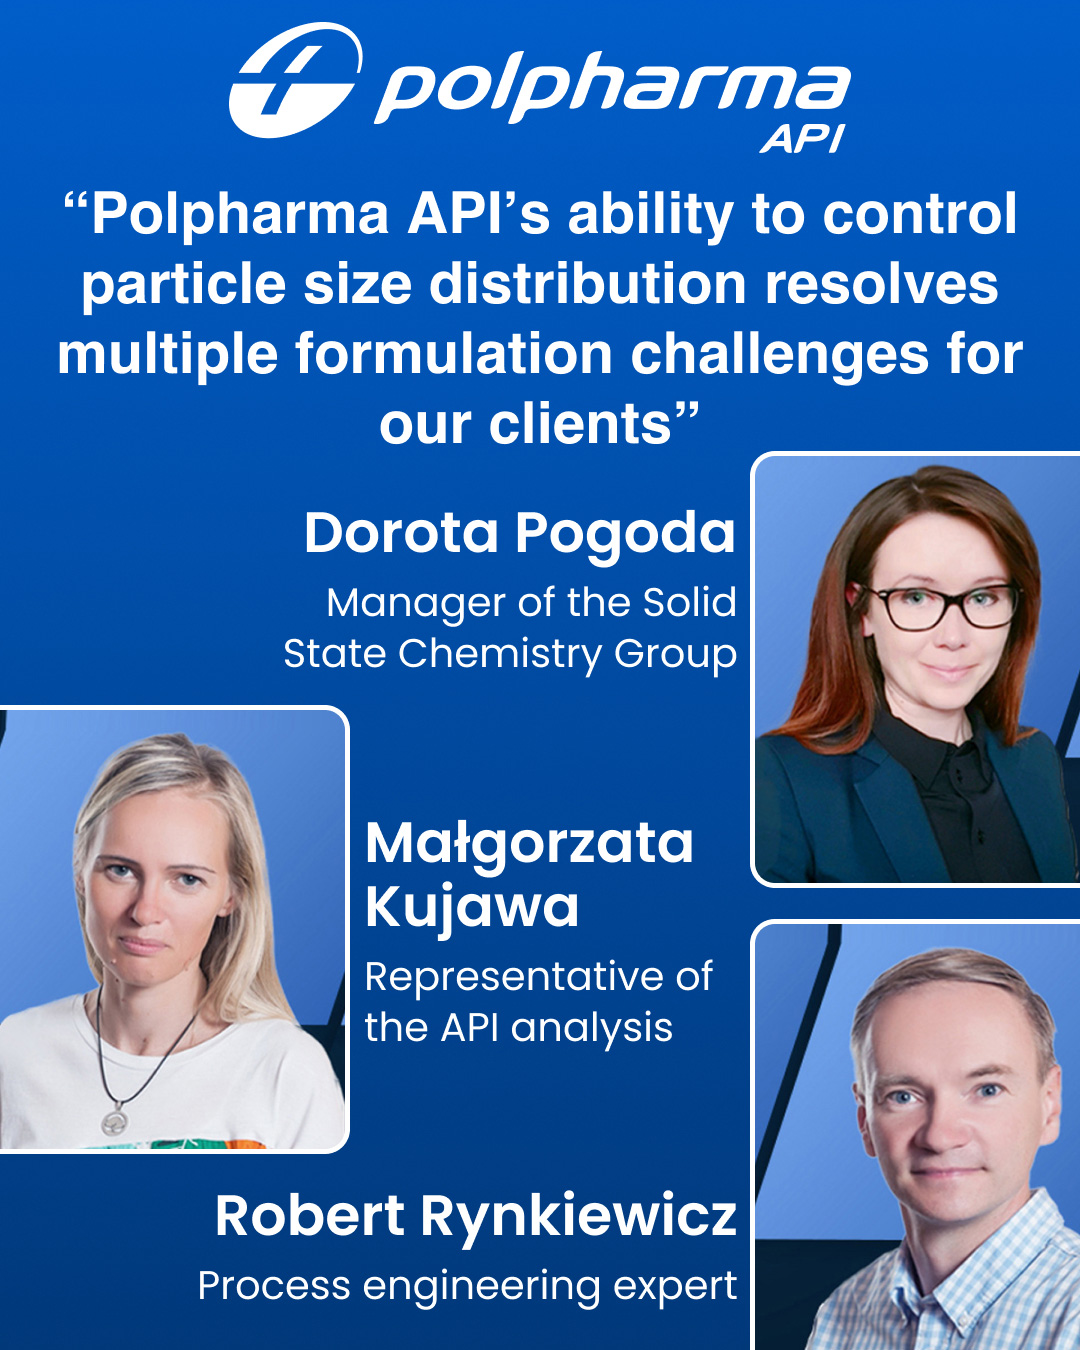 “Polpharma API’s ability to control particle size distribution resolves multiple formulation challenges for our clients”